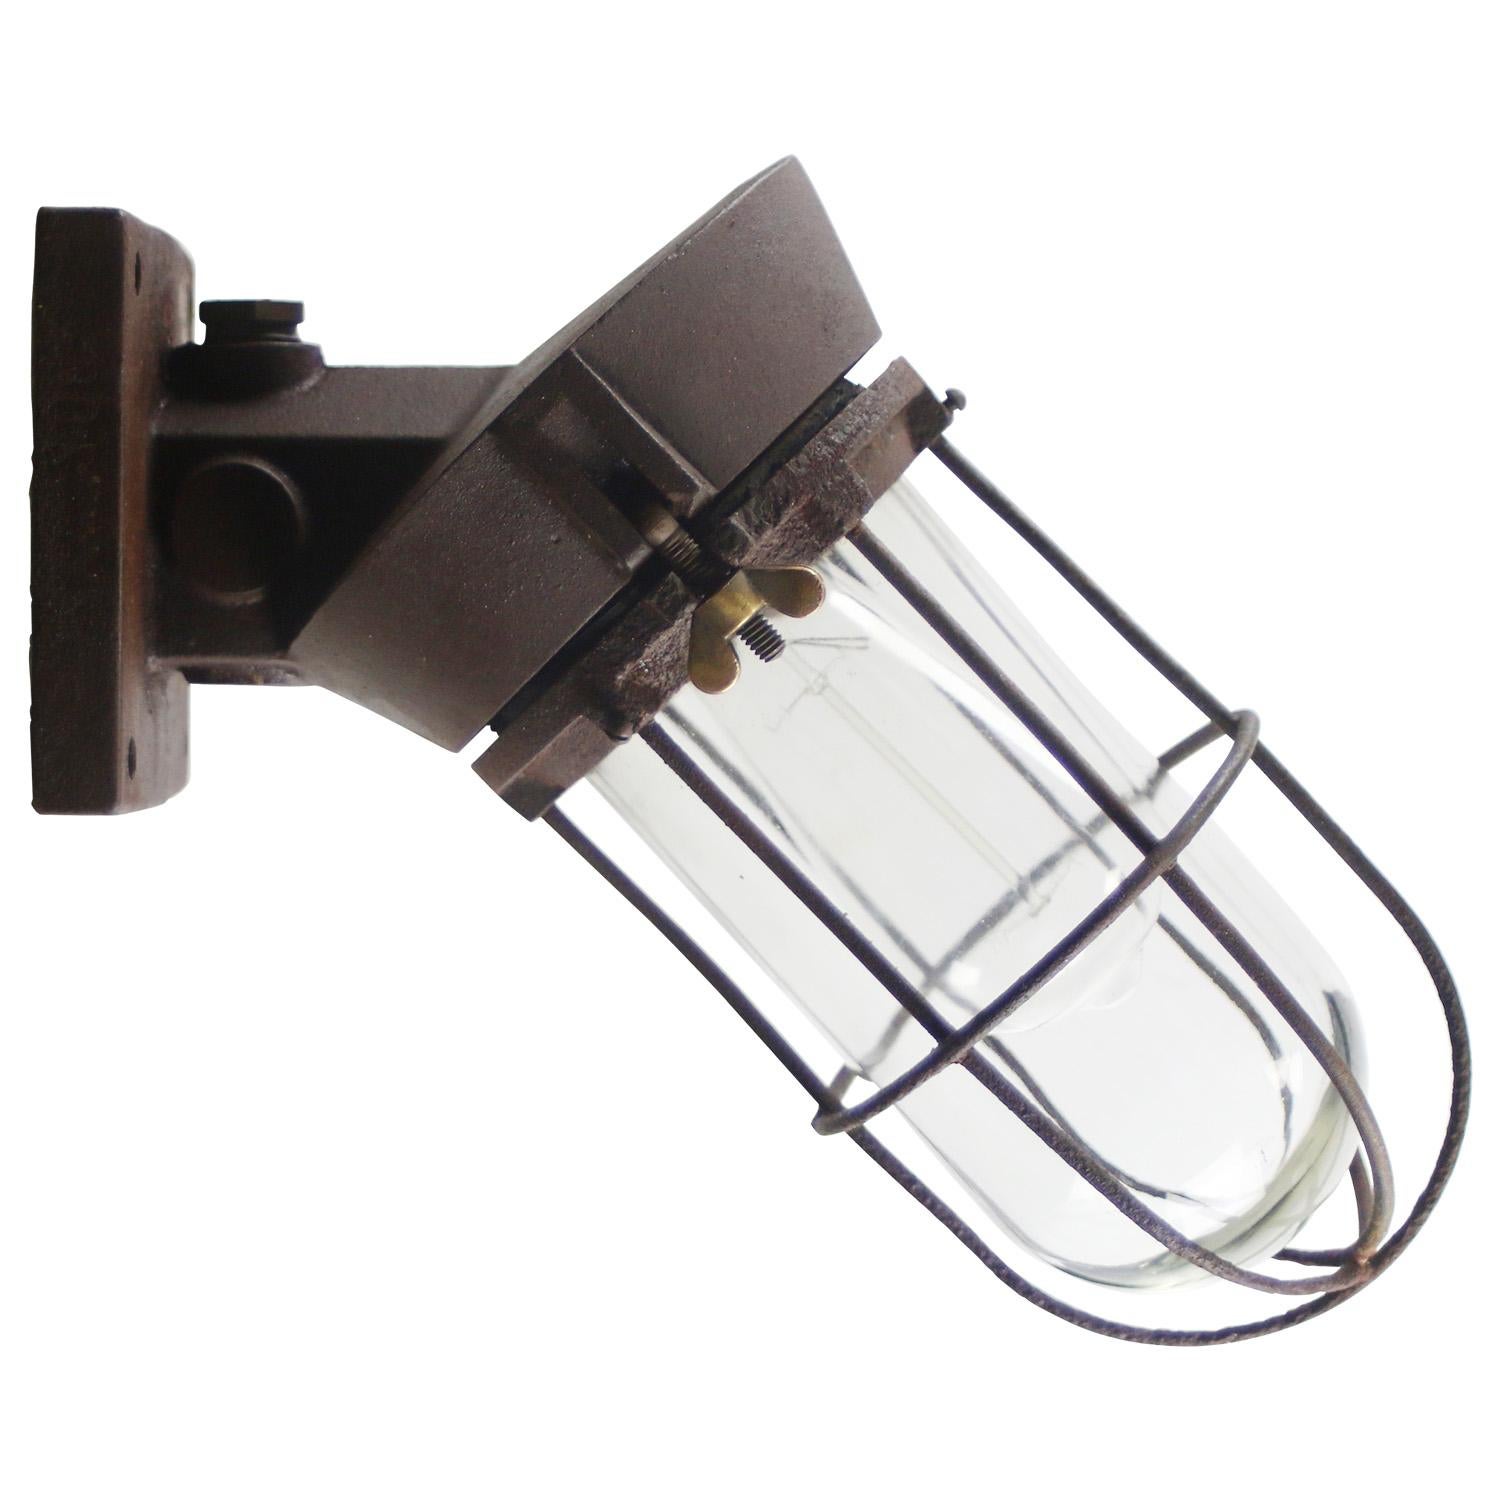 Dutch Industrial wall lamp made by ‘Industria Rotterdam’
Rust brown cast iron with clear glass

Weight: 4.00 kg / 8.8 lb

Priced per individual item. All lamps have been made suitable by international standards for incandescent light bulbs,